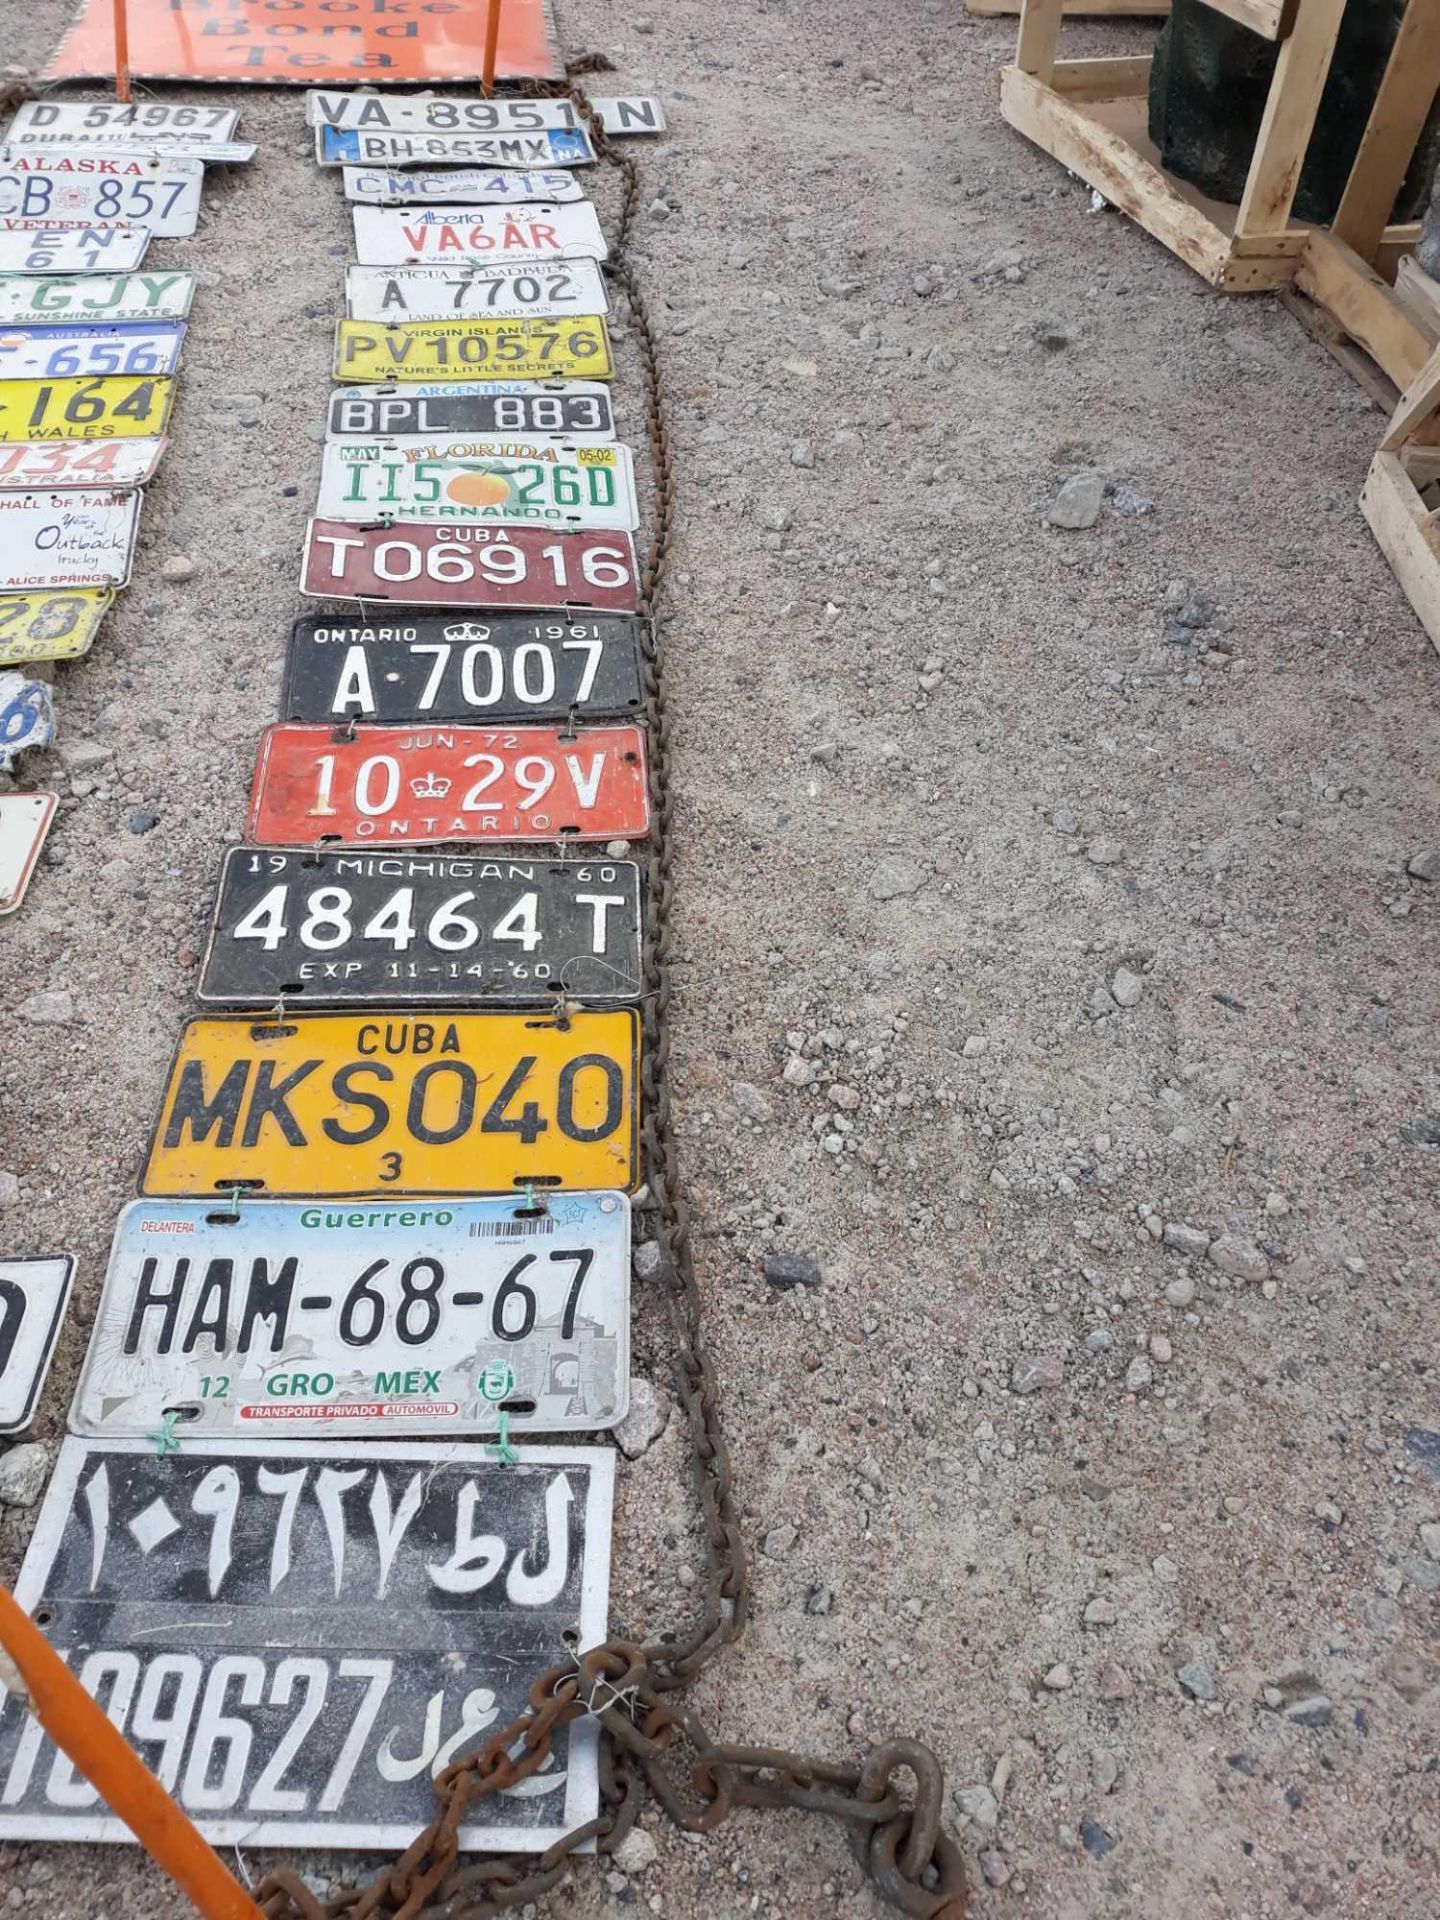 17 NUMBER PLATES ON CHAIN